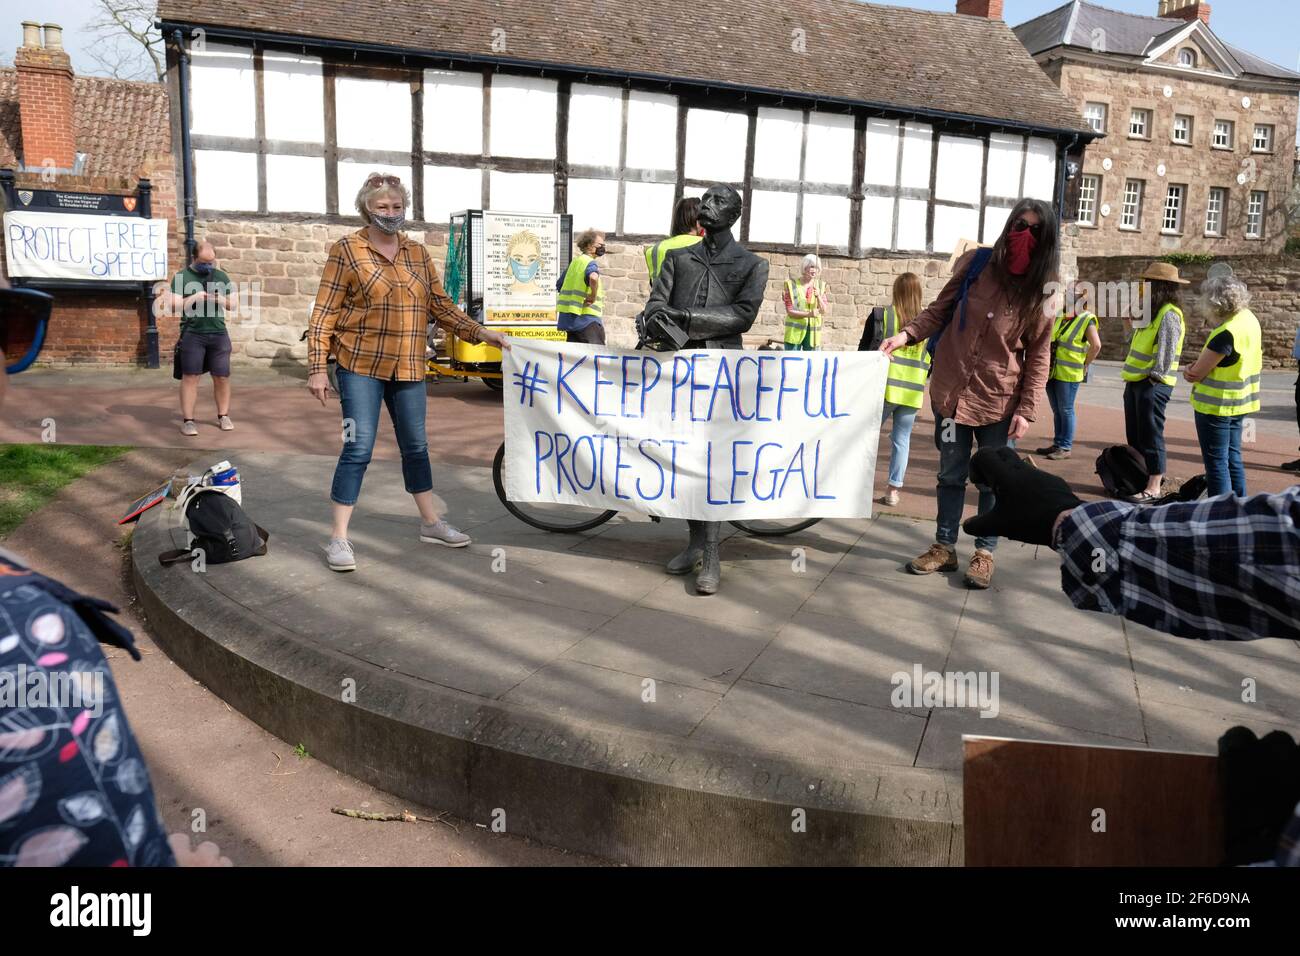 Hereford, Herefordshire, UK – Wednesday 31st March 2021 – Protesters demonstrate on the Cathedral Green against the new Police, Crime, Sentencing and Courts Bill ( PCSC ) which they feel will limit their rights to legal protest. Photo Steven May / Alamy Live News Stock Photo